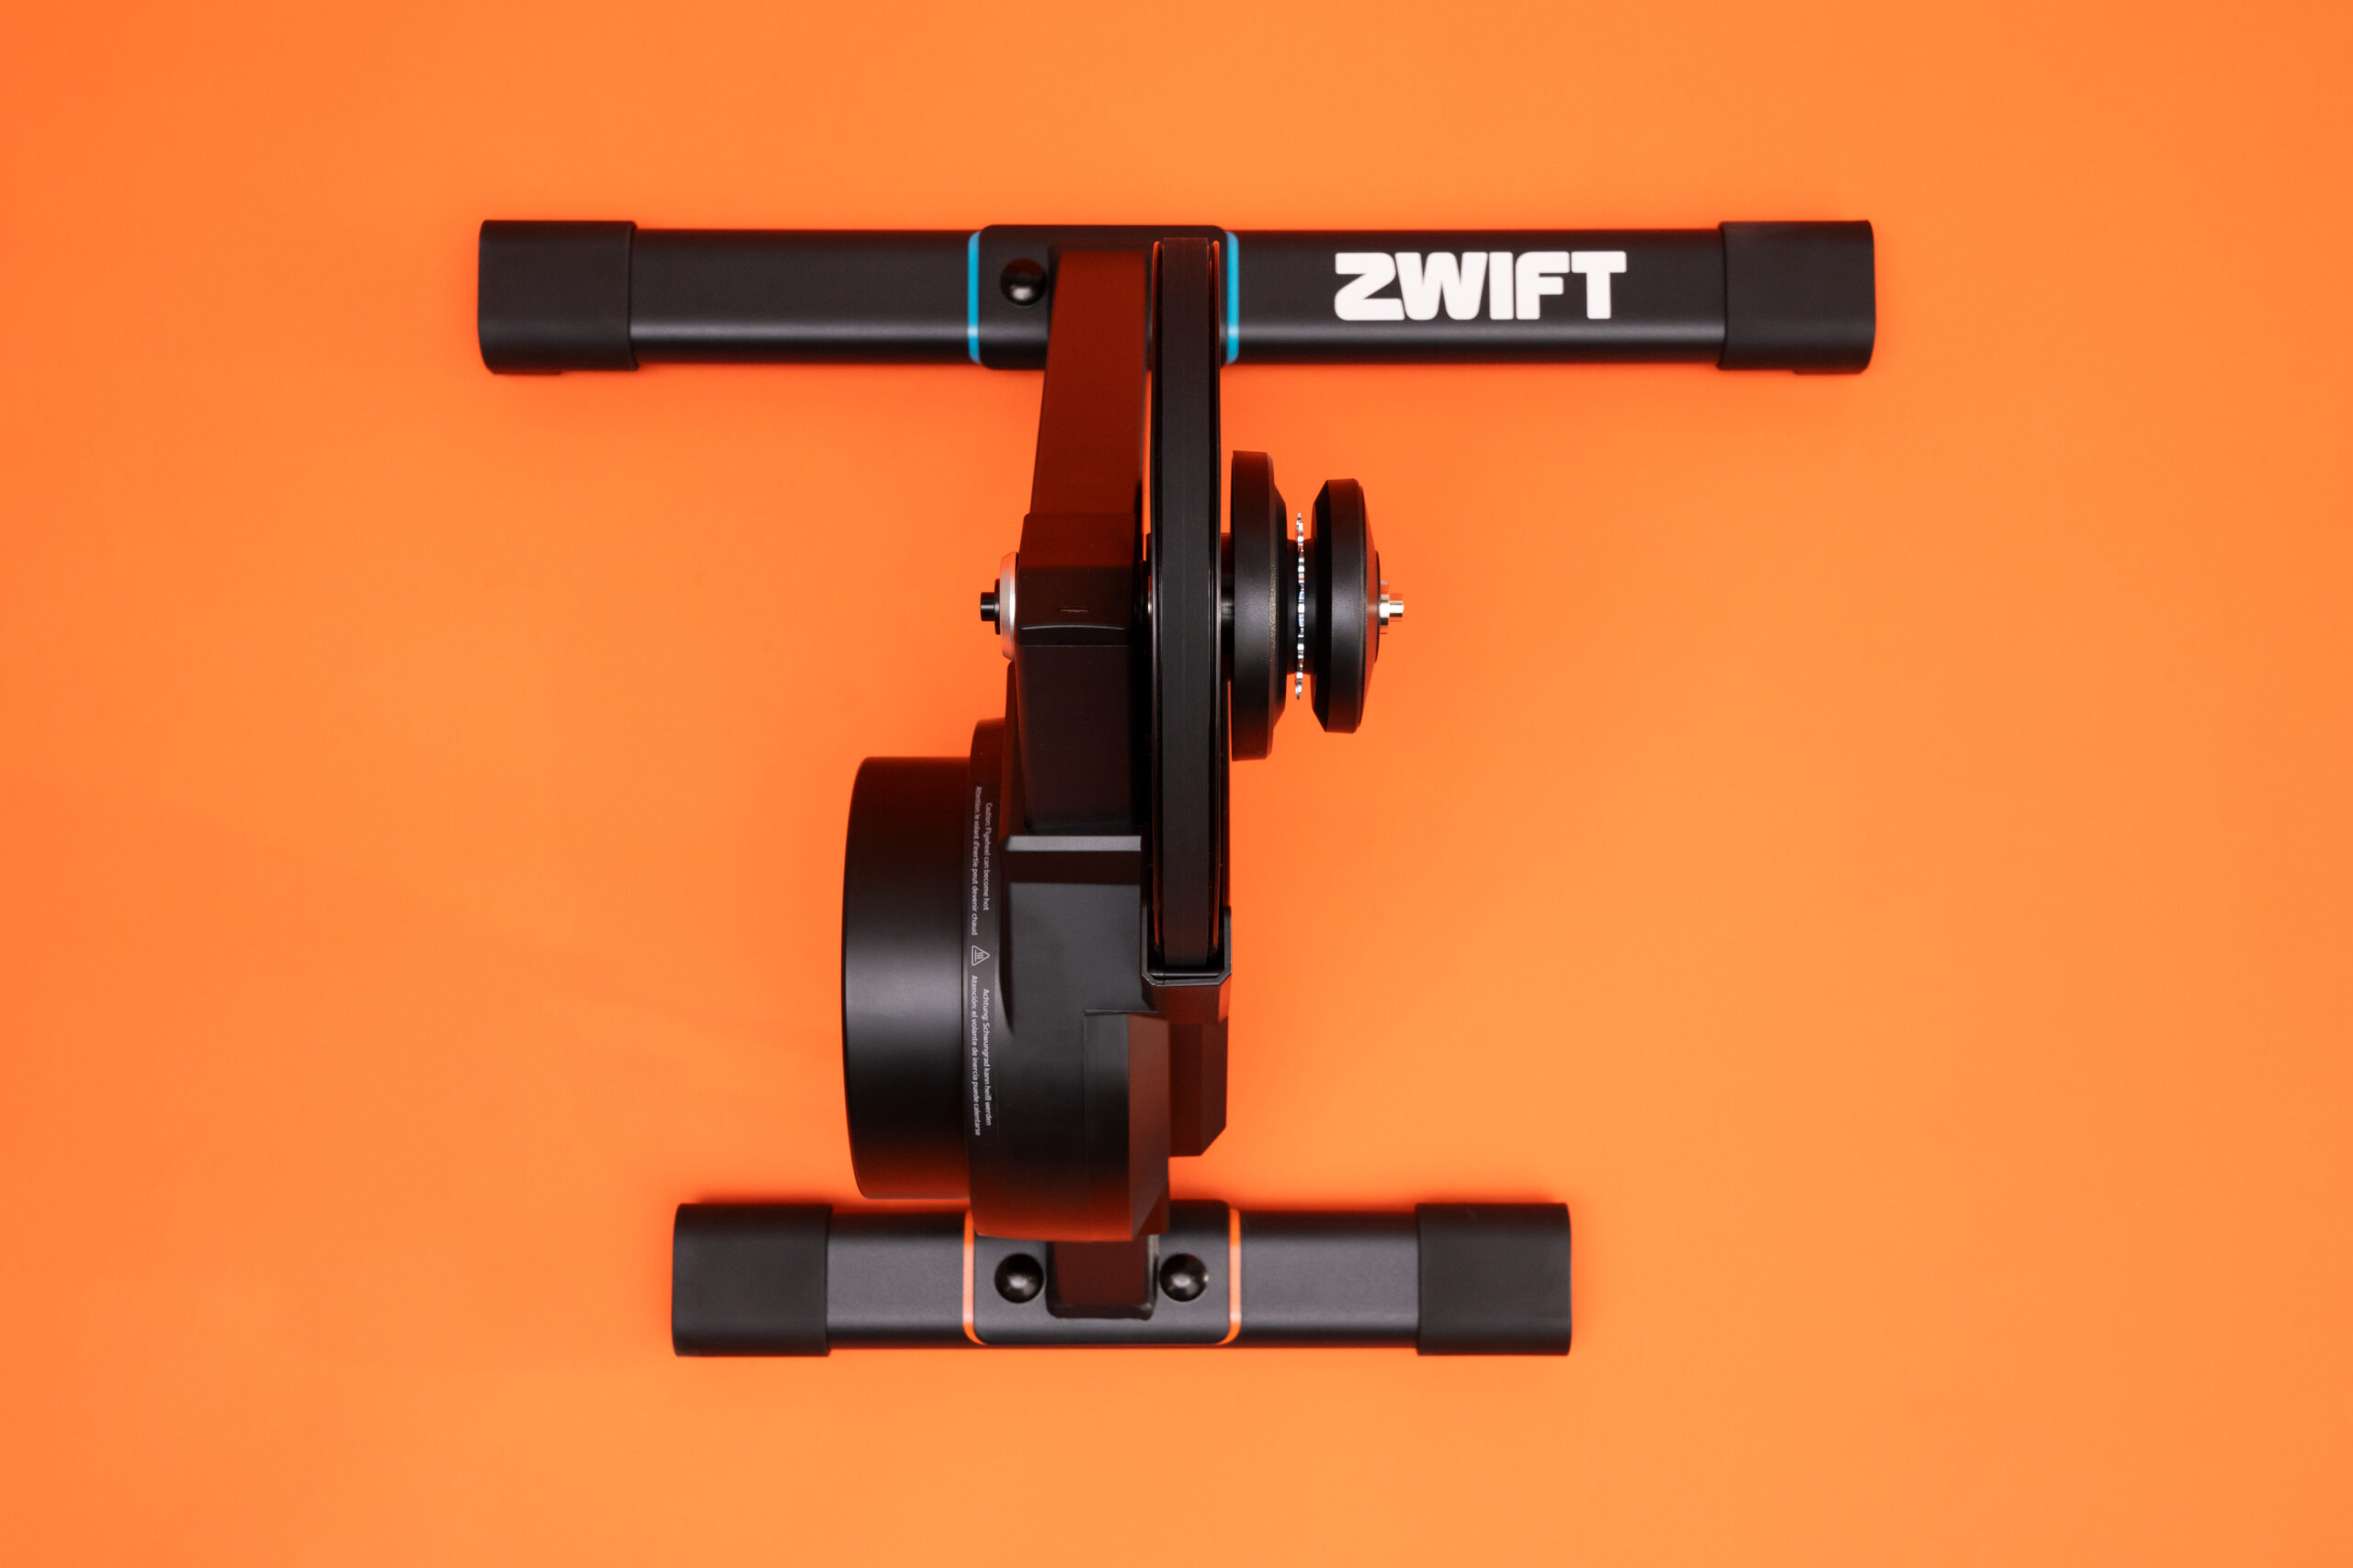 Virtual Shifting? The New Zwift Hub One Trainer Drops The Cassette